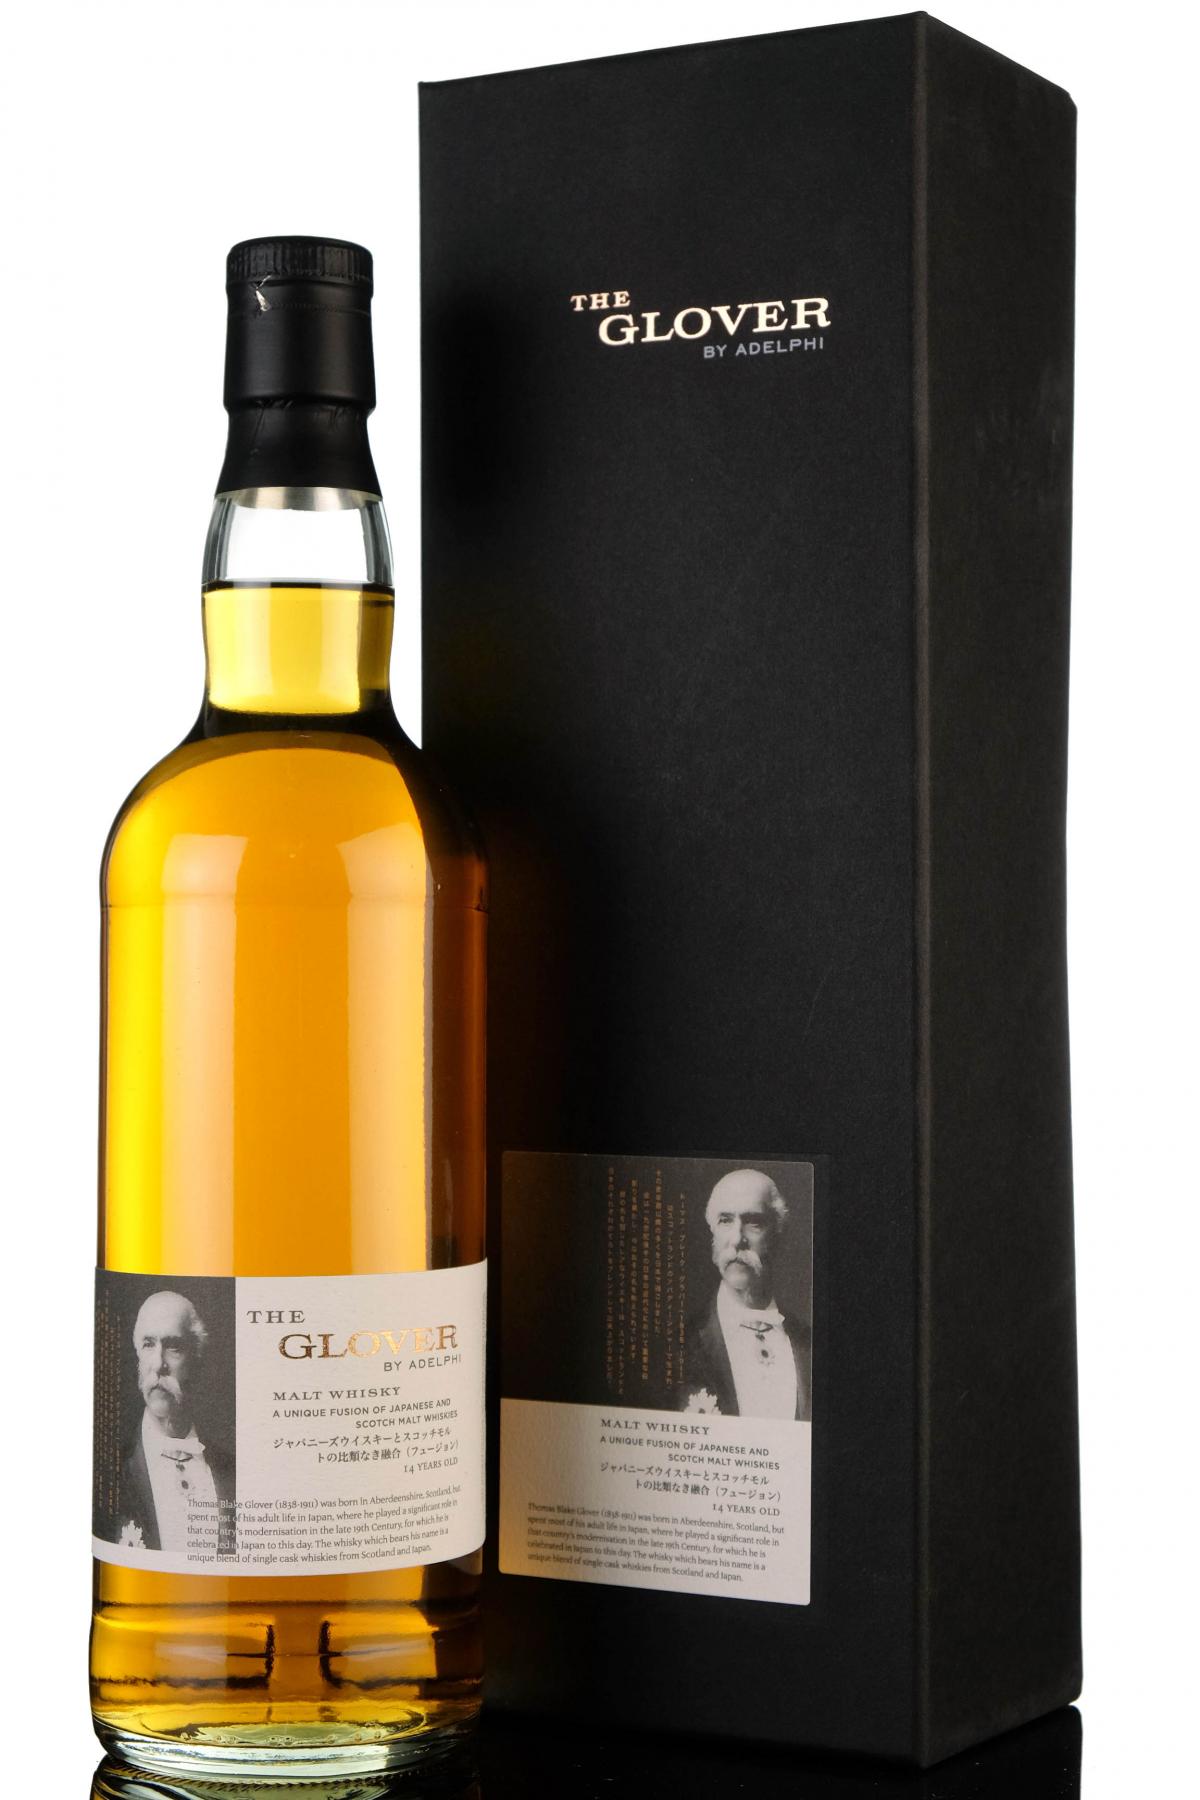 The Glover 14 Year Old - Adelphi